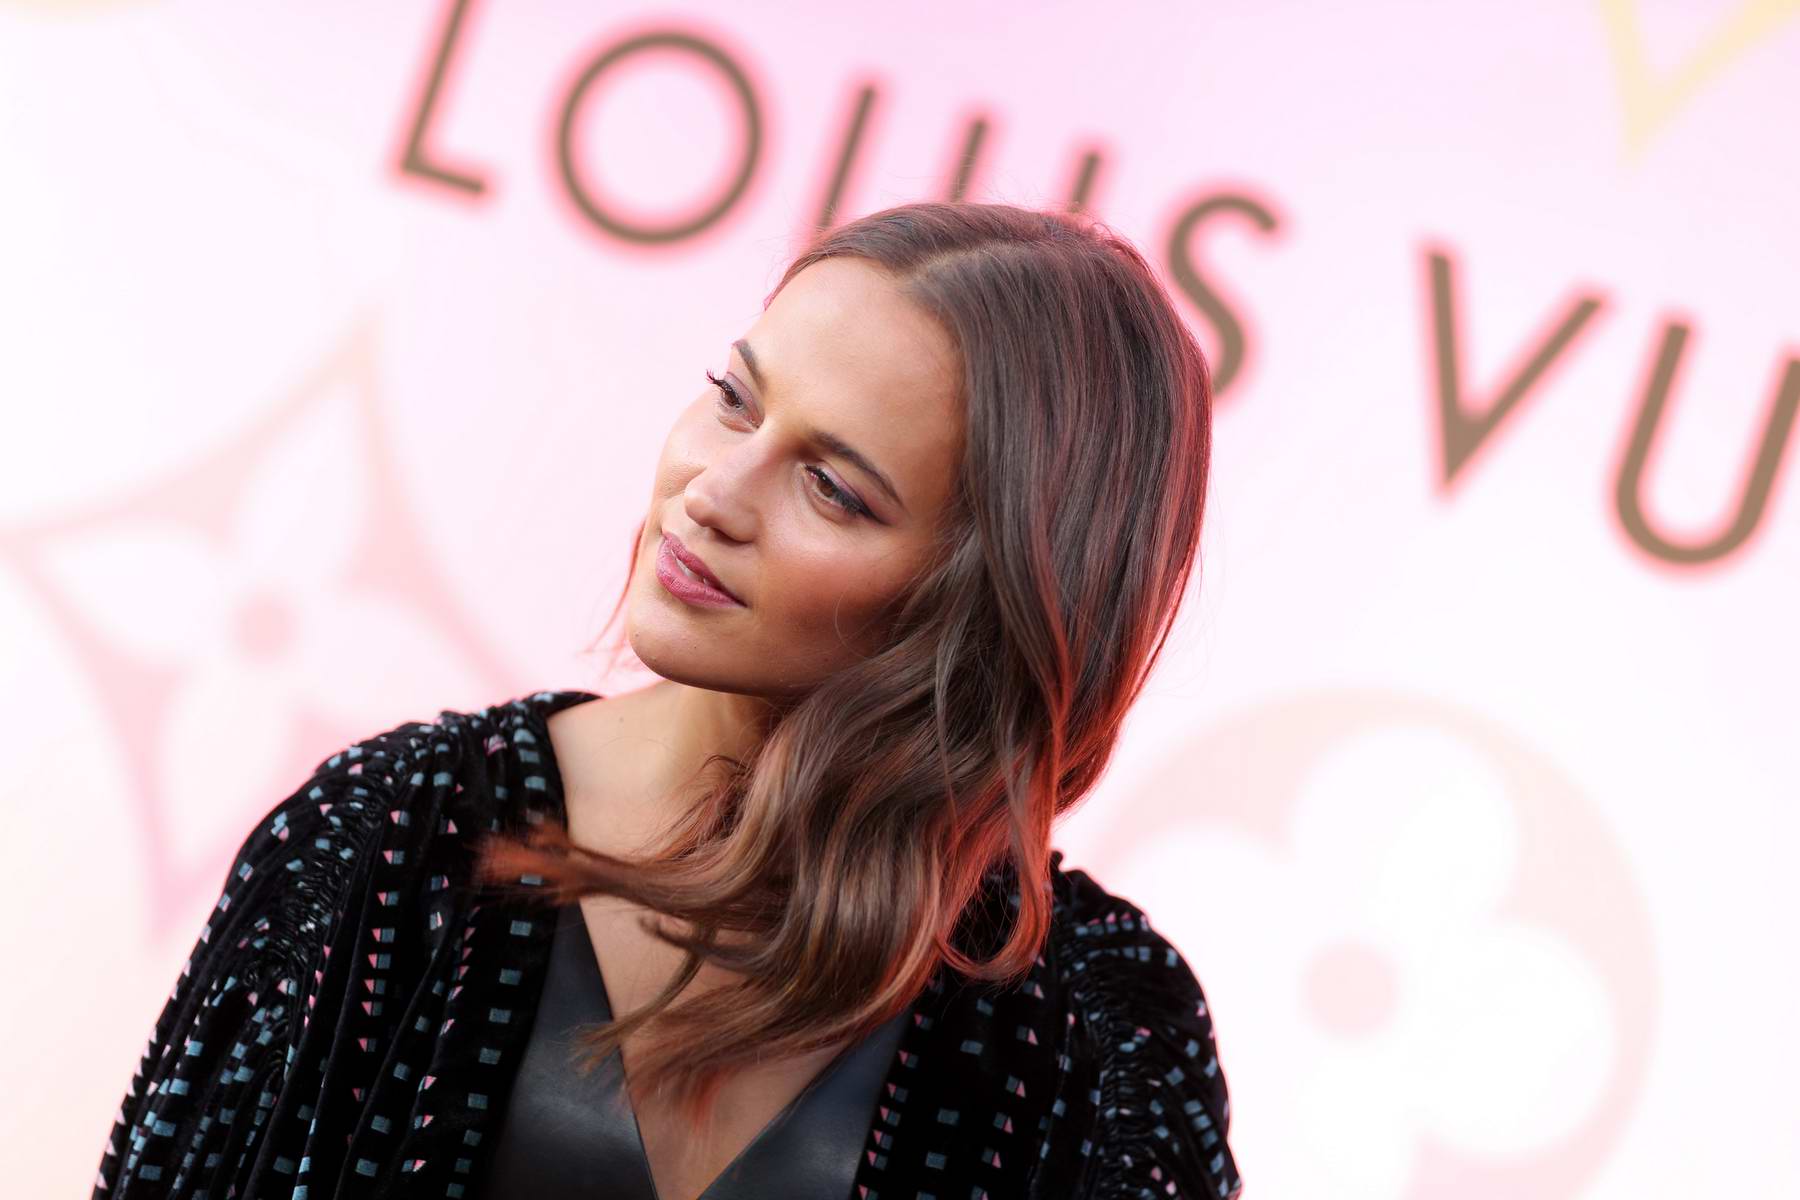 alicia vikander attends the louis vuitton x cocktail party in beverly hills, los angeles-270619_5